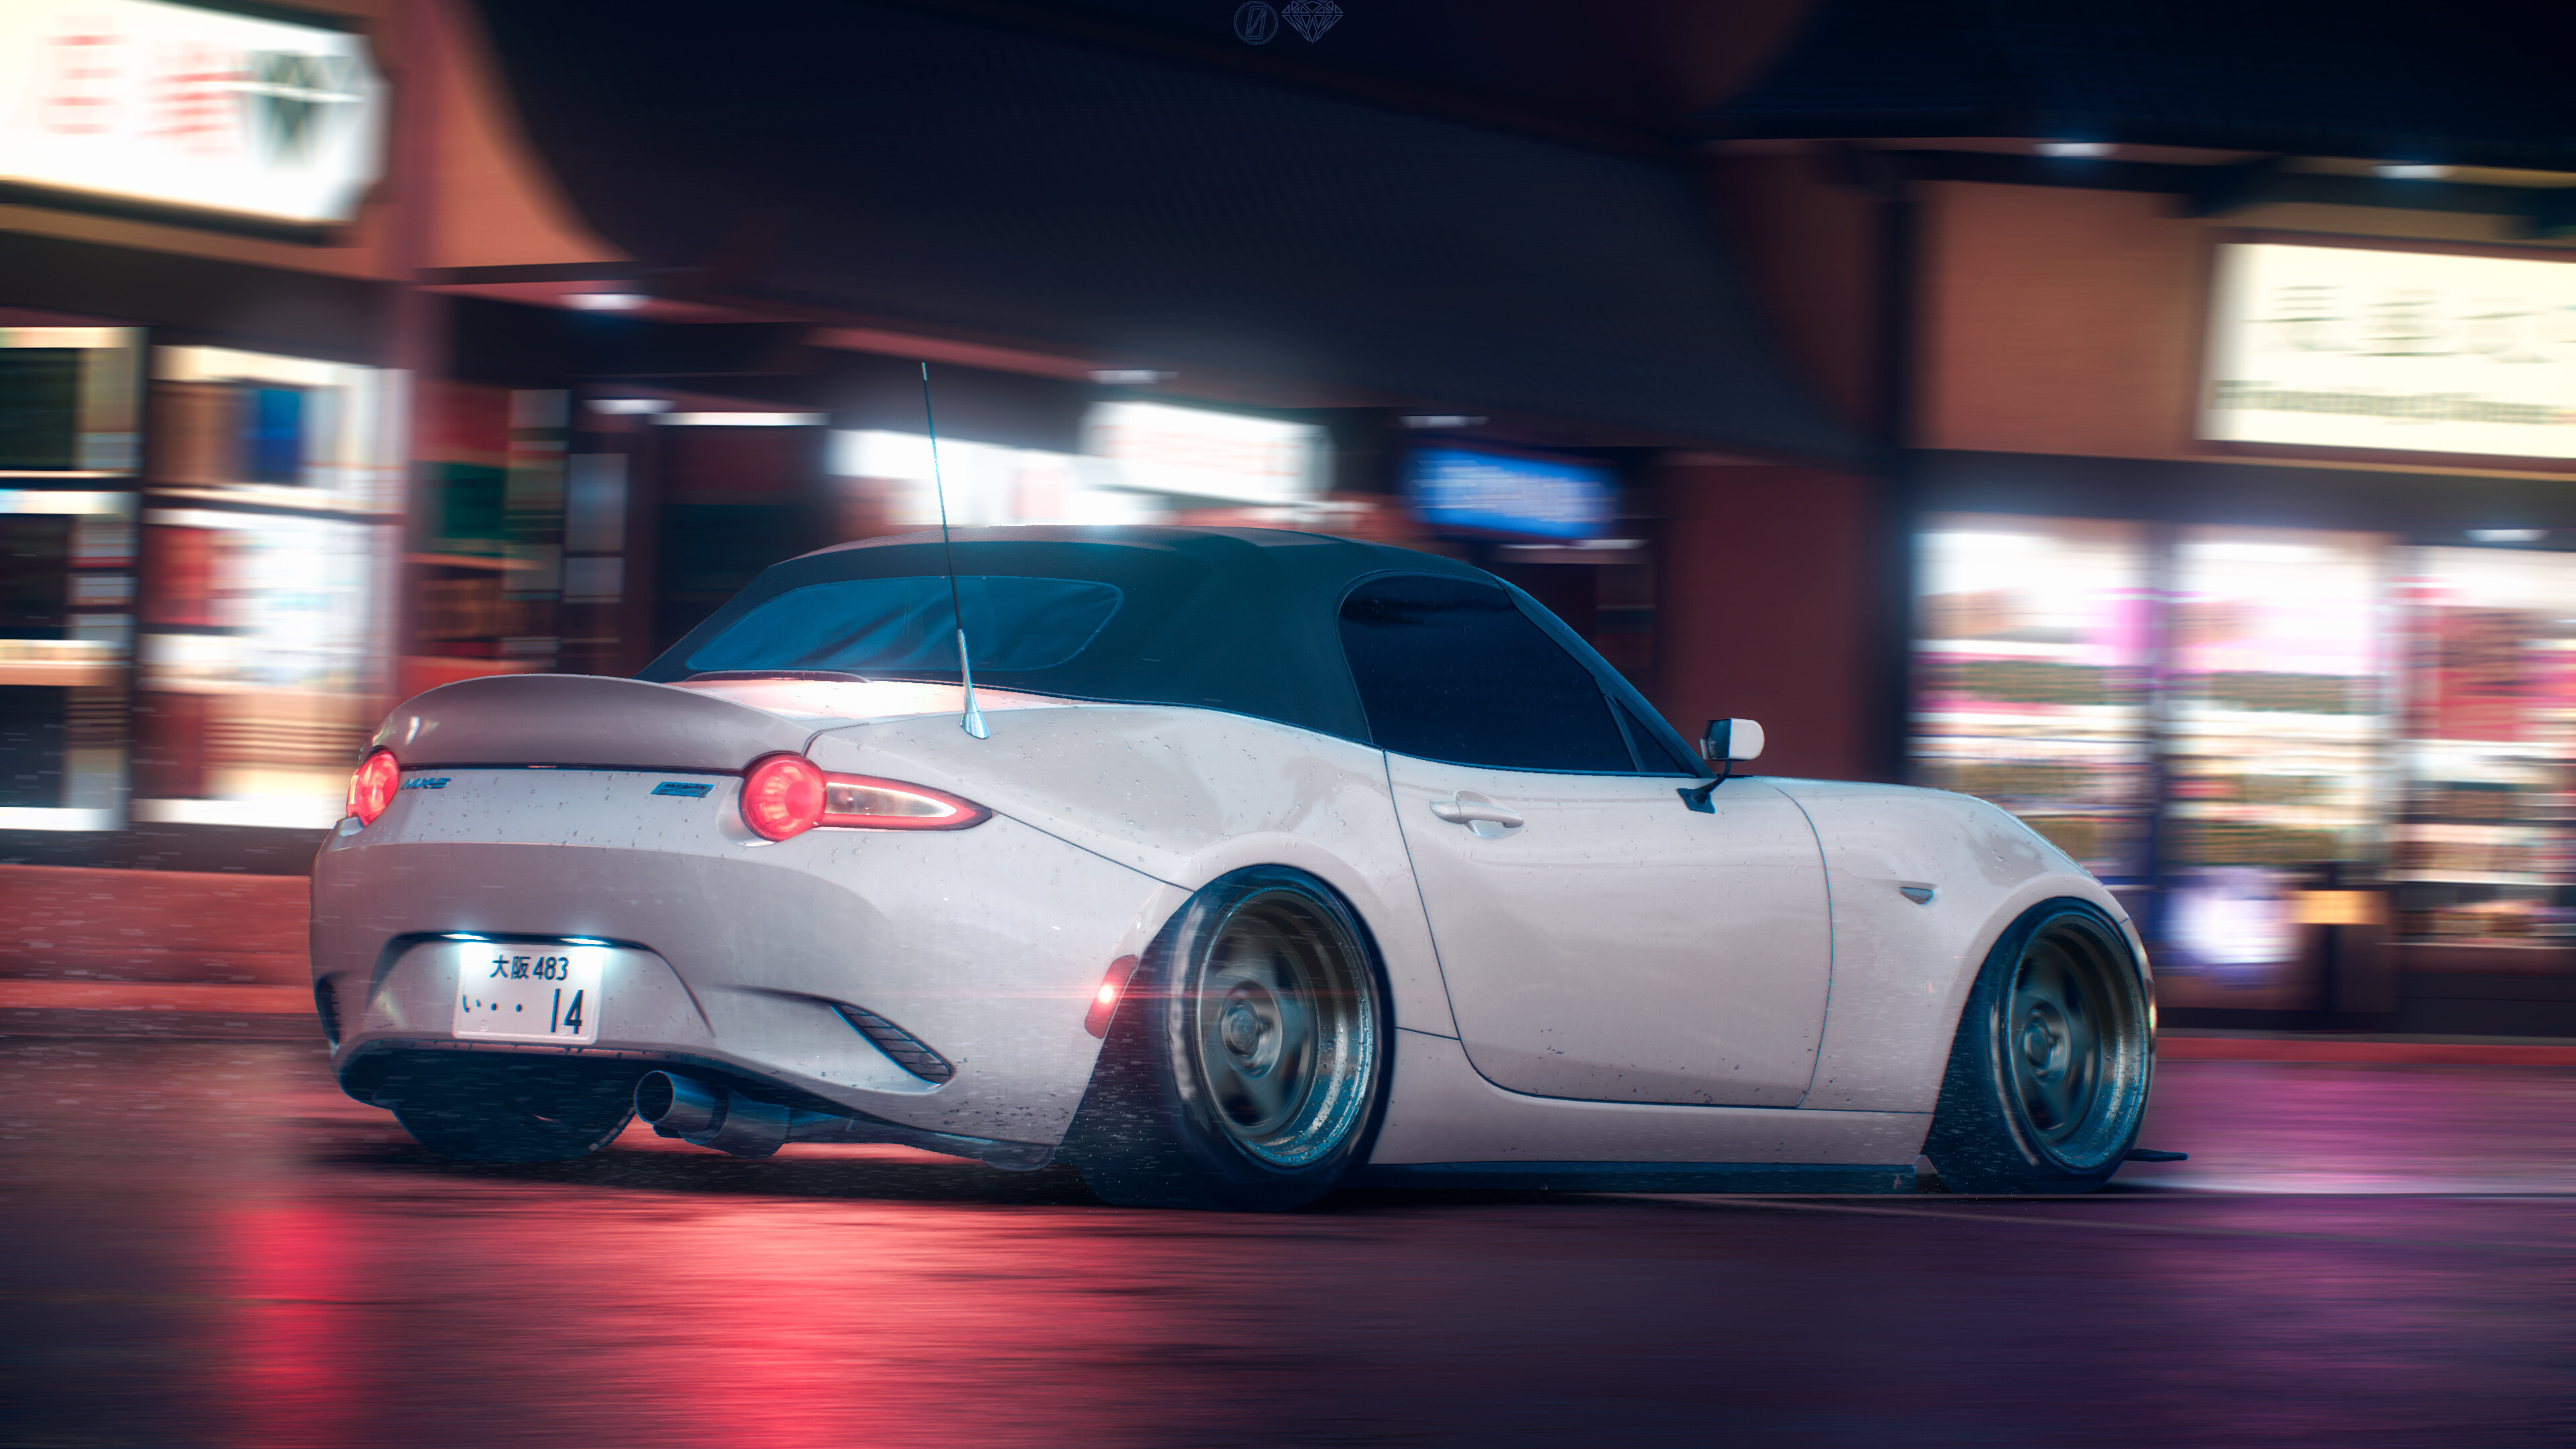 Mazda MX-5 Miata: NFS, Games, Manufactured at Hiroshima plant, Debuted in 1989. 3840x2160 4K Background.